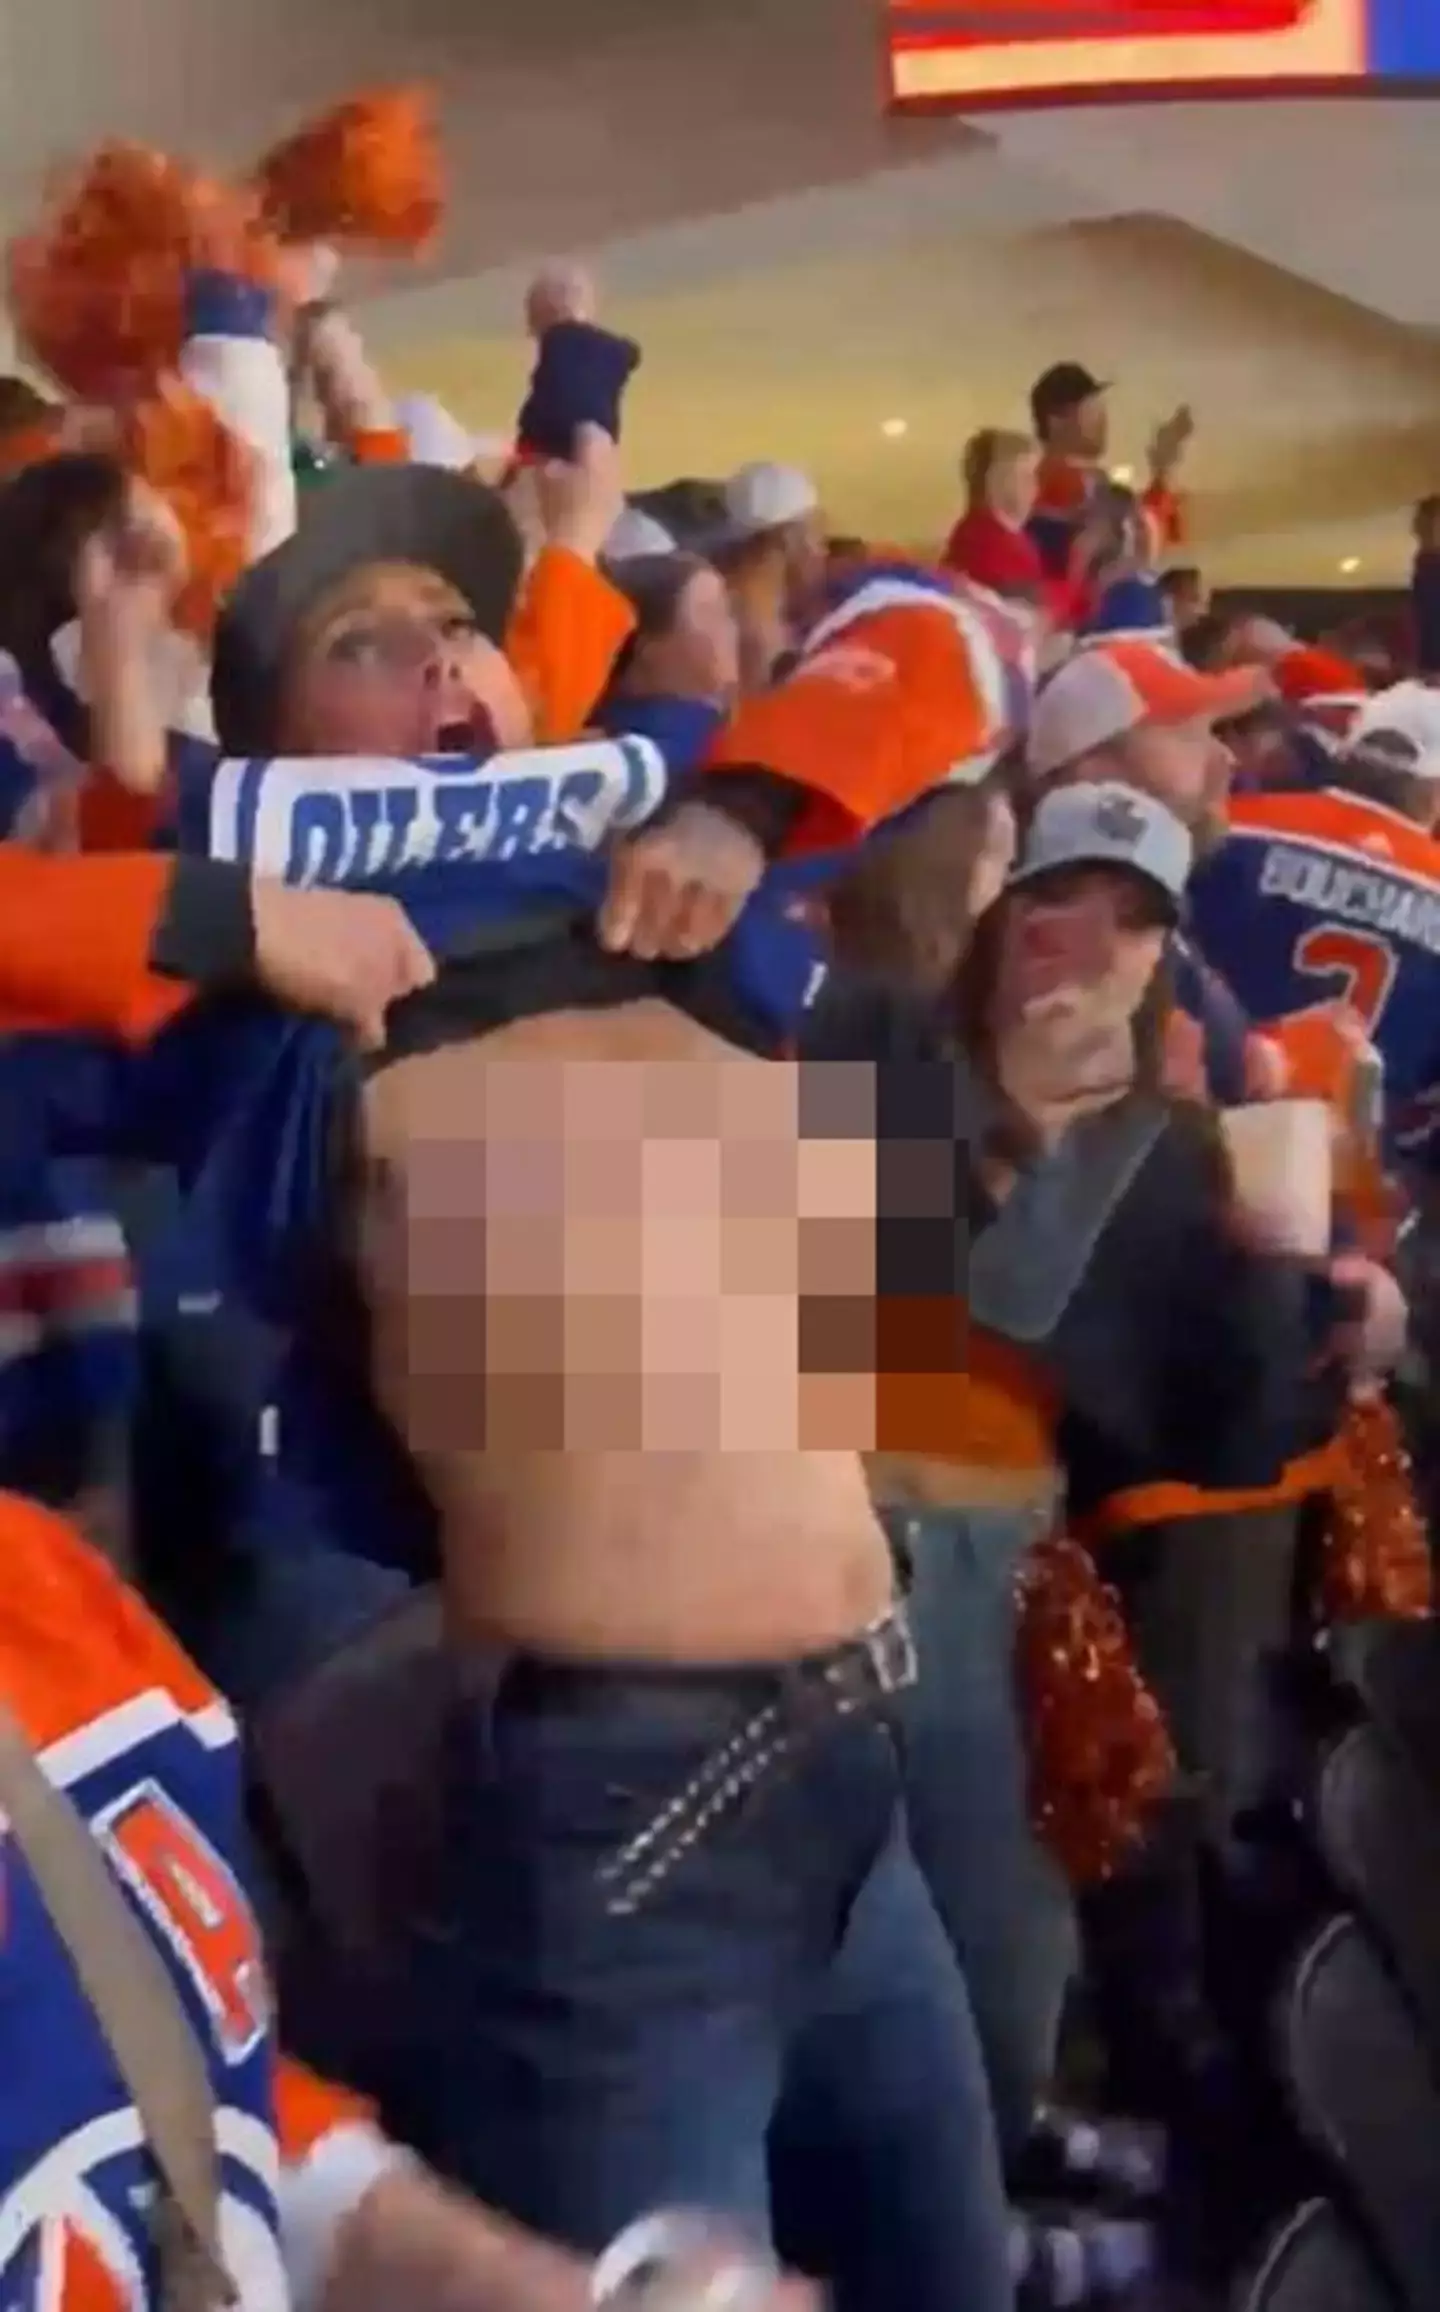 Kait went viral after flashing her boobs at a hockey game. (X/@Gerry39464526)